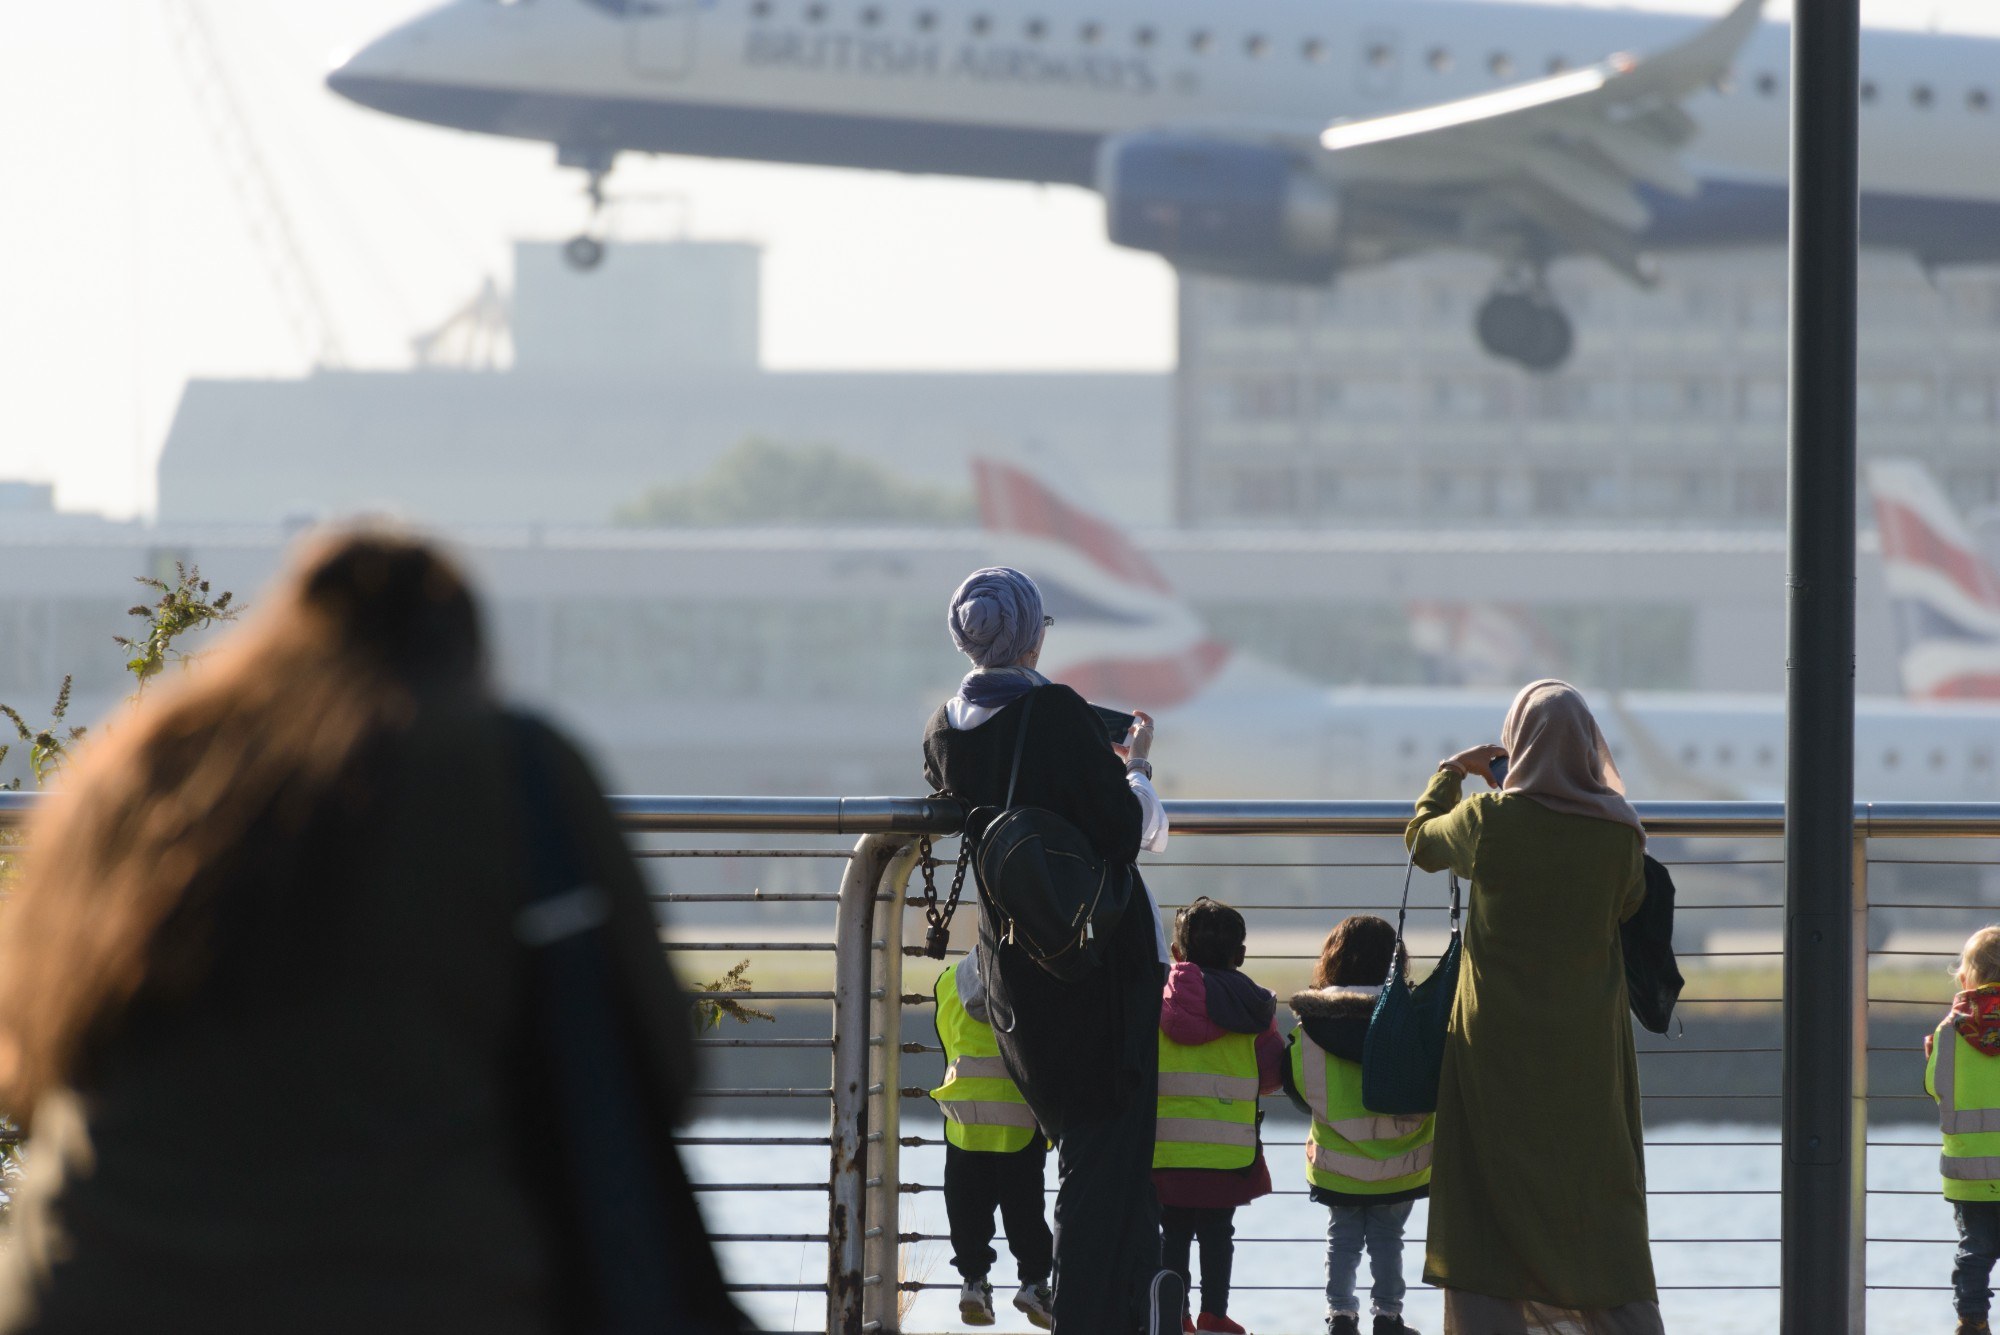 Plane watchers at London City Airport